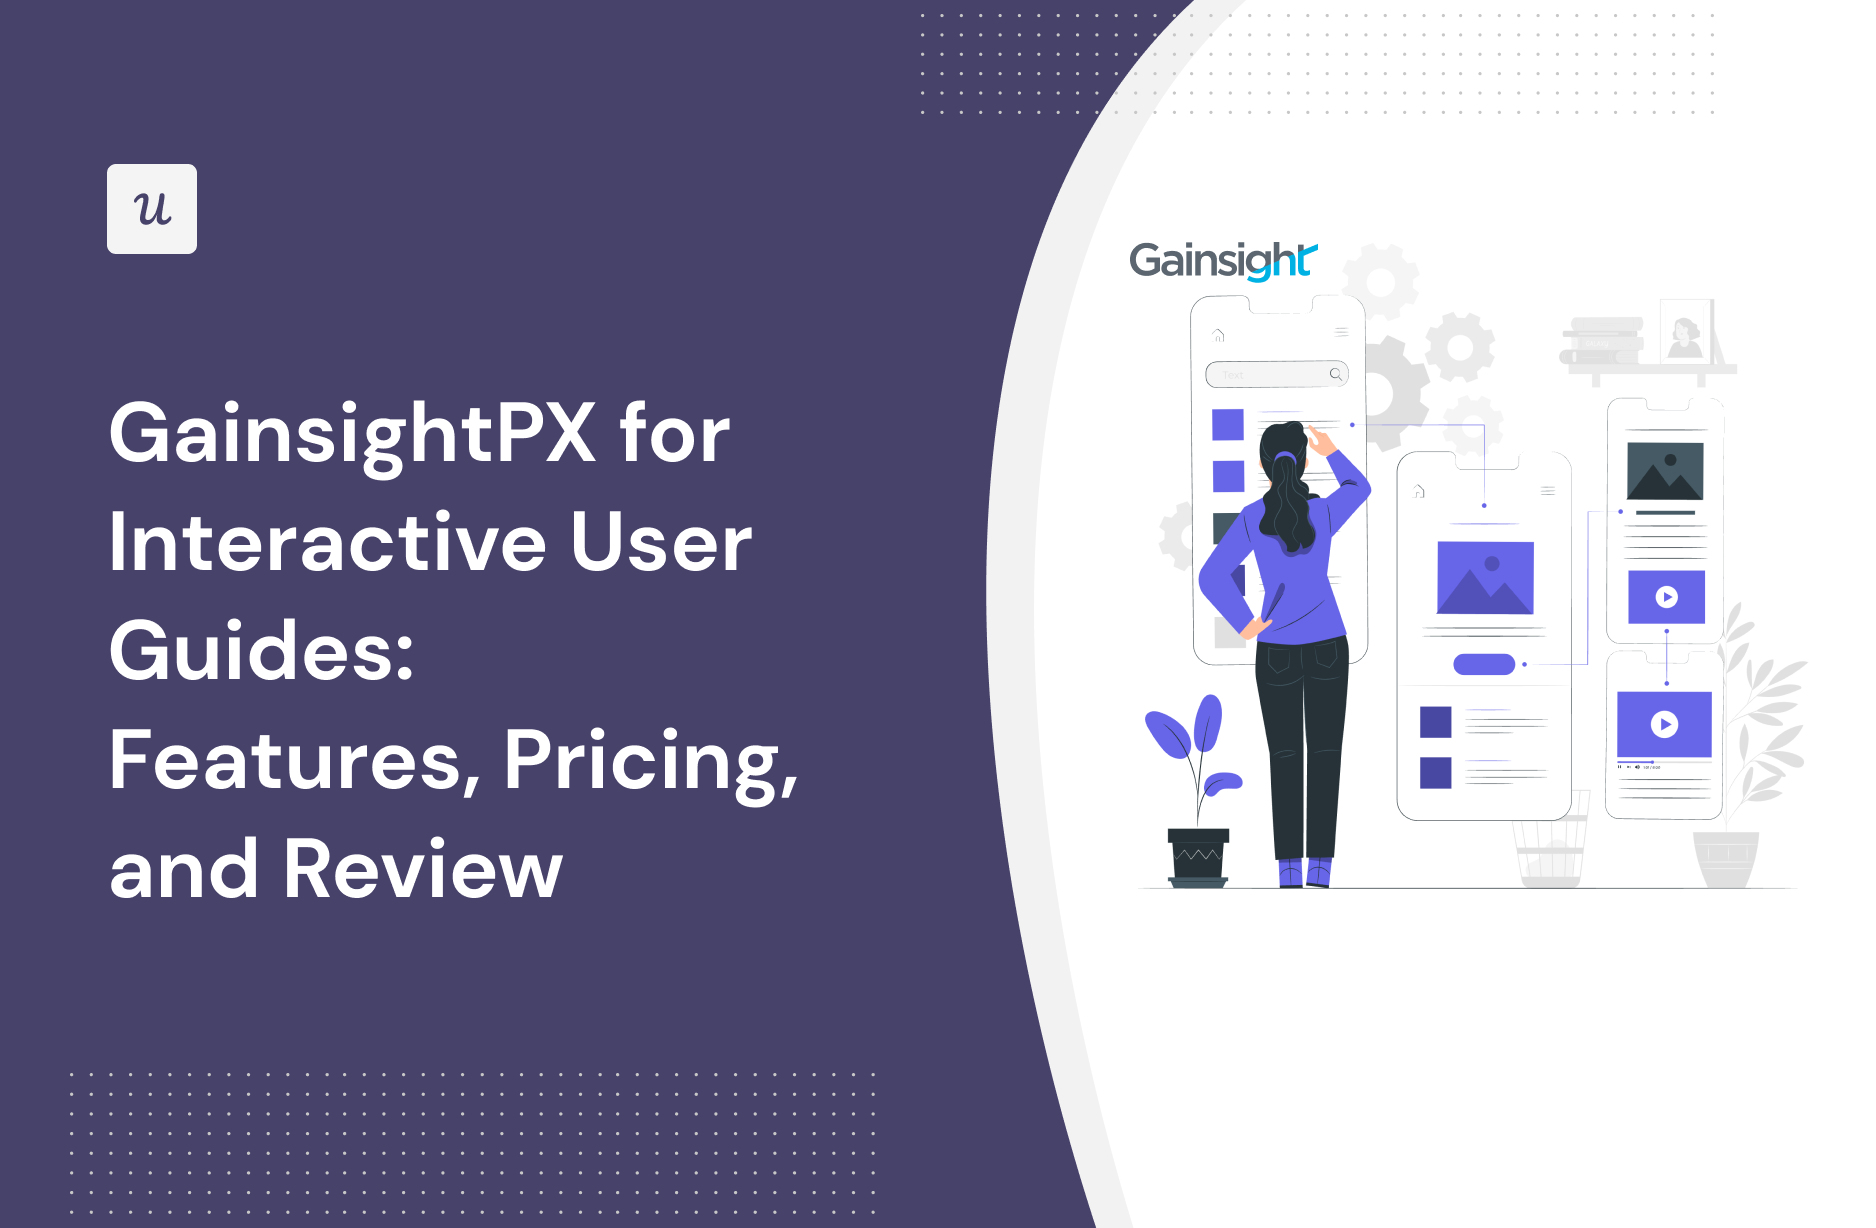 GainsightPX for Interactive User Guides: Features, Pricing, and Review